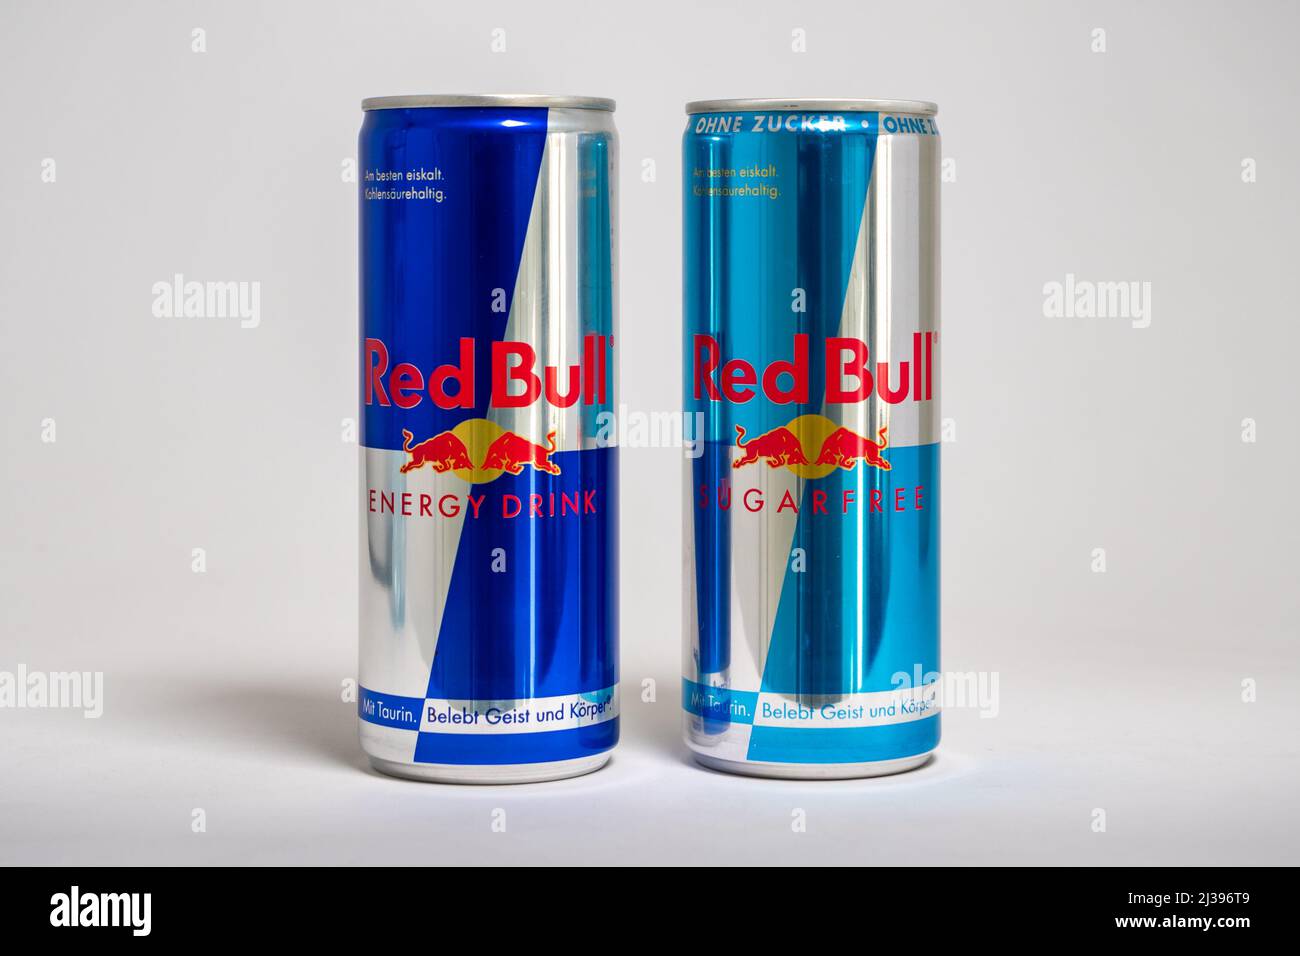 Red Bull original and sugar free cans next to each other. Famous energy drink brand in different variations. Lifestyle beverage with caffeine. Stock Photo